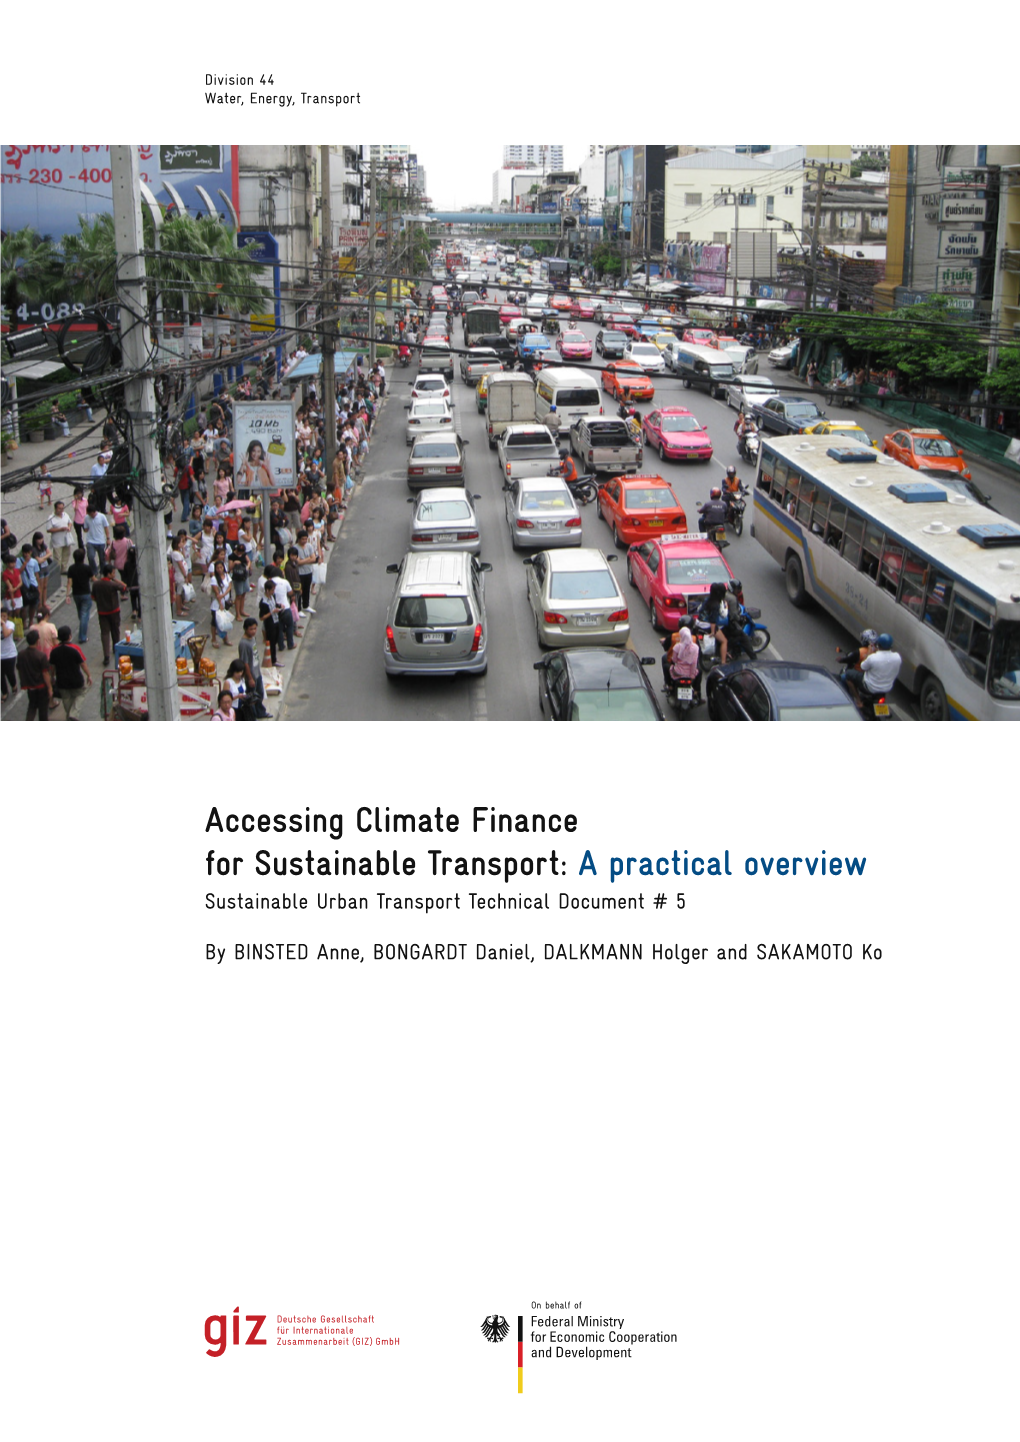 Accessing Climate Finance for Sustainable Transport: a Practical Overview Sustainable Urban Transport Technical Document # 5